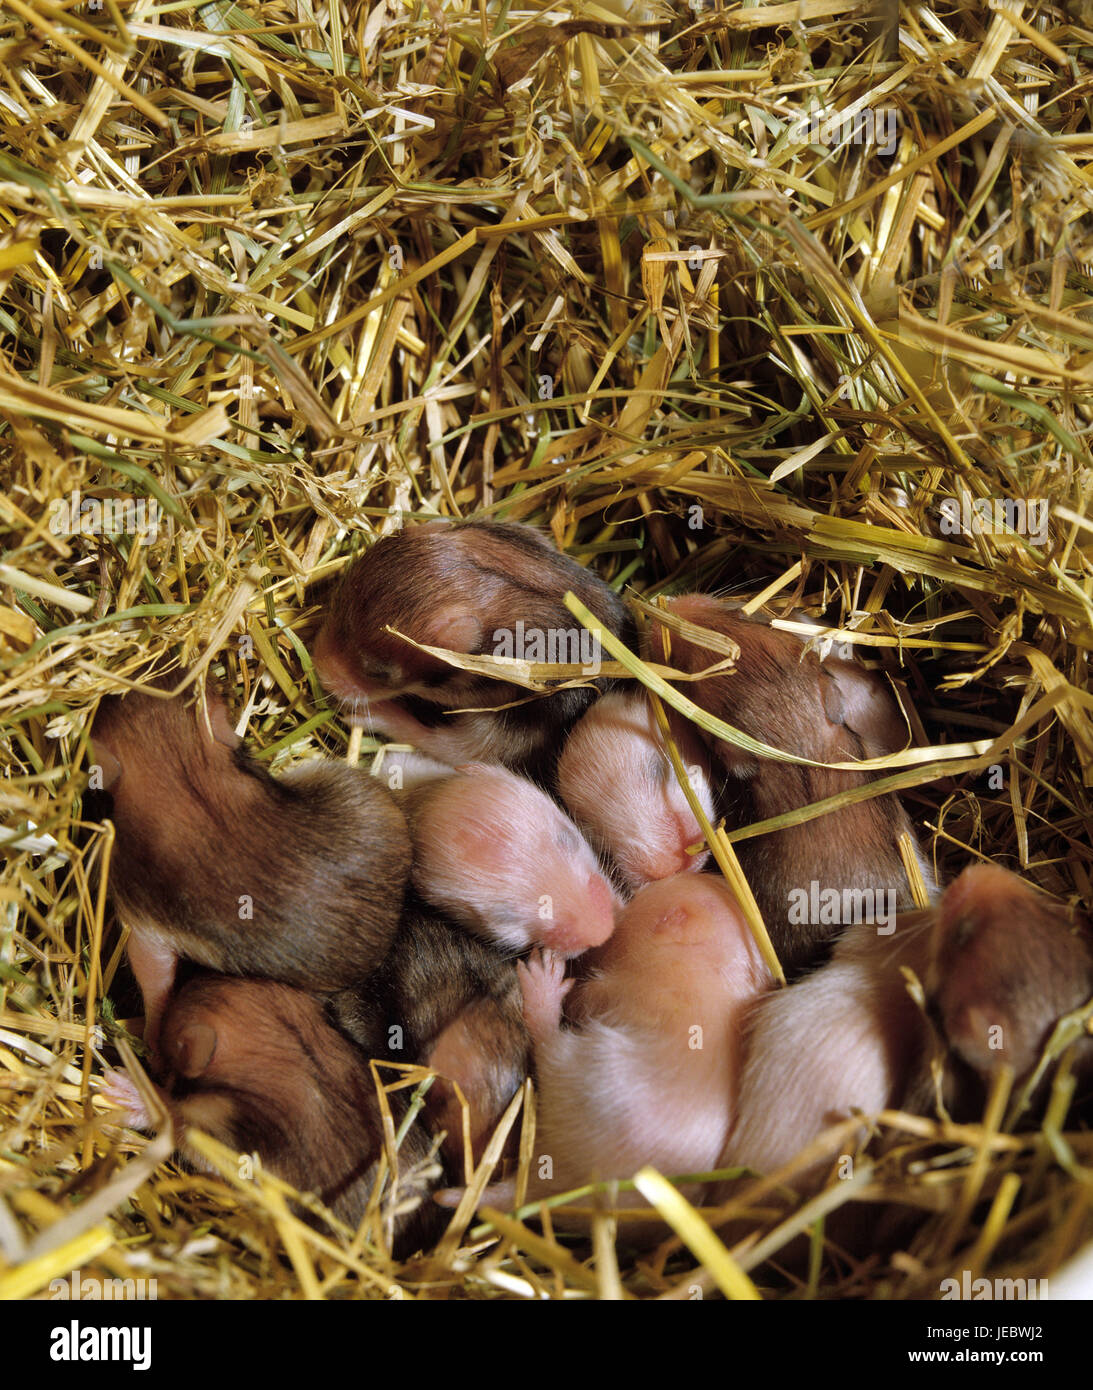 Syrian golden hamsters, Mesocricetus auratus, young animals in the nest, Stock Photo